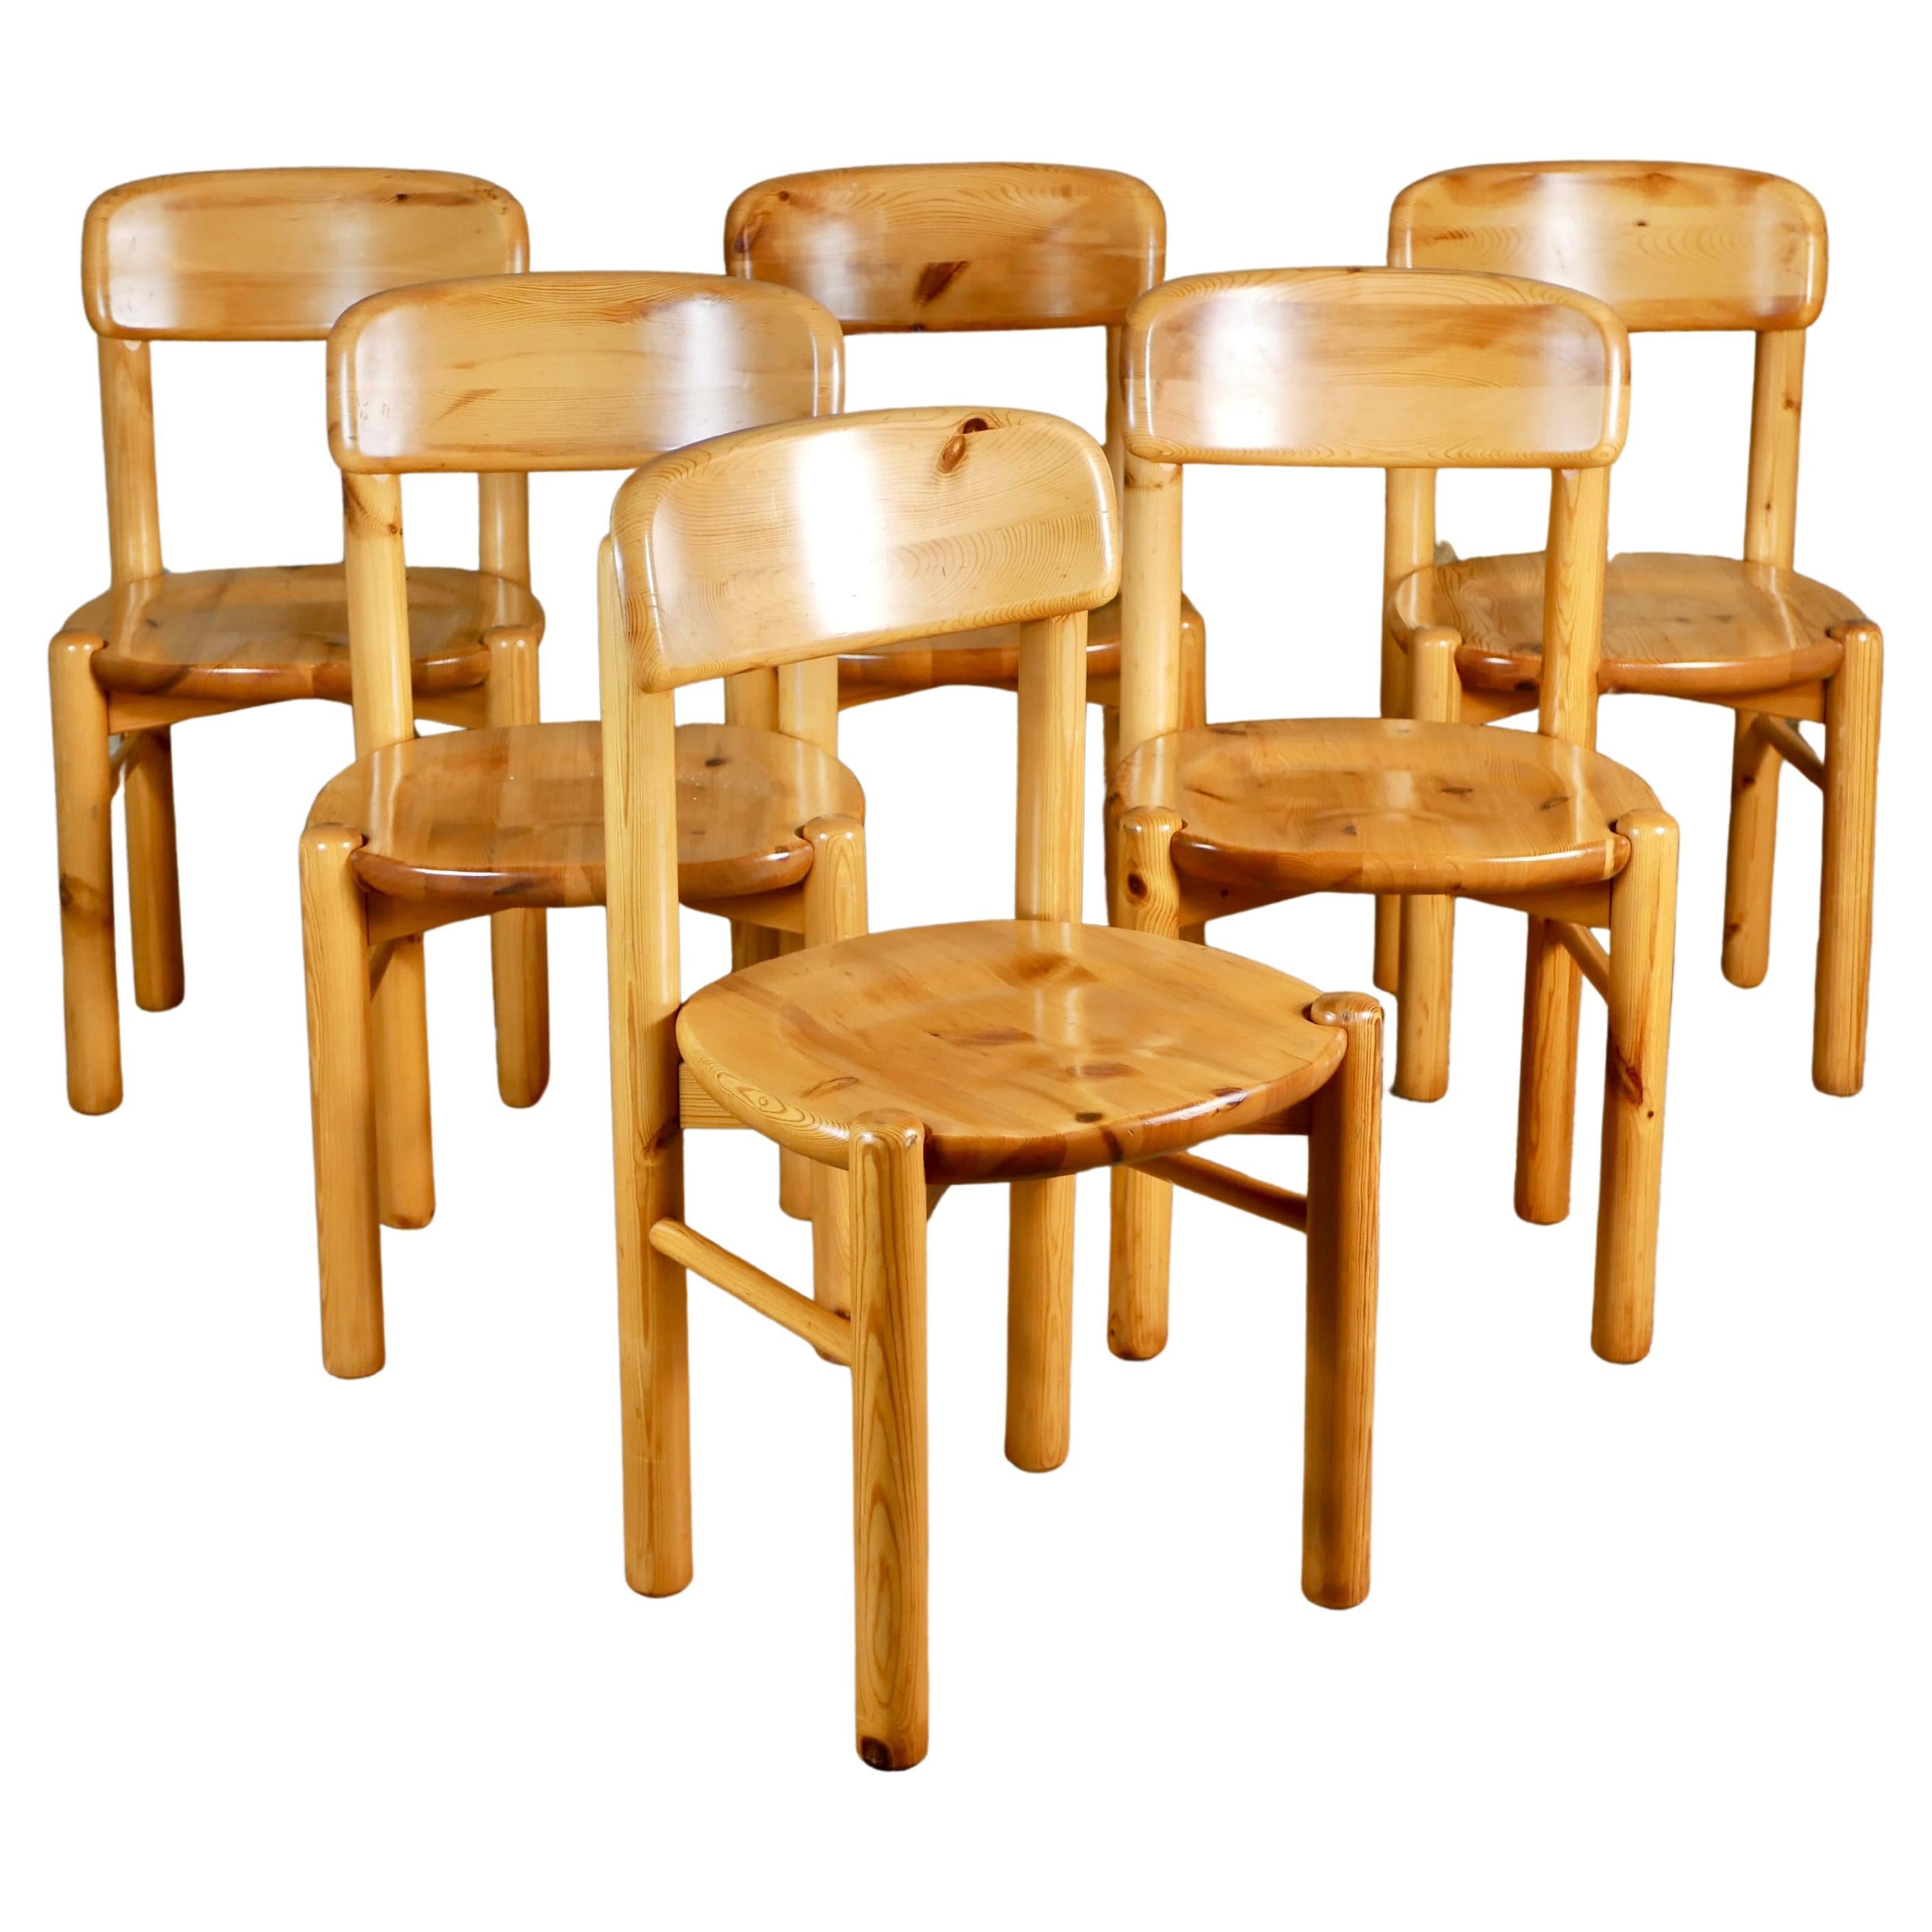 Set of 6 pine chairs by Rainer Daumiller for Hirsthals Savvaerk, Denmark, 1960s For Sale